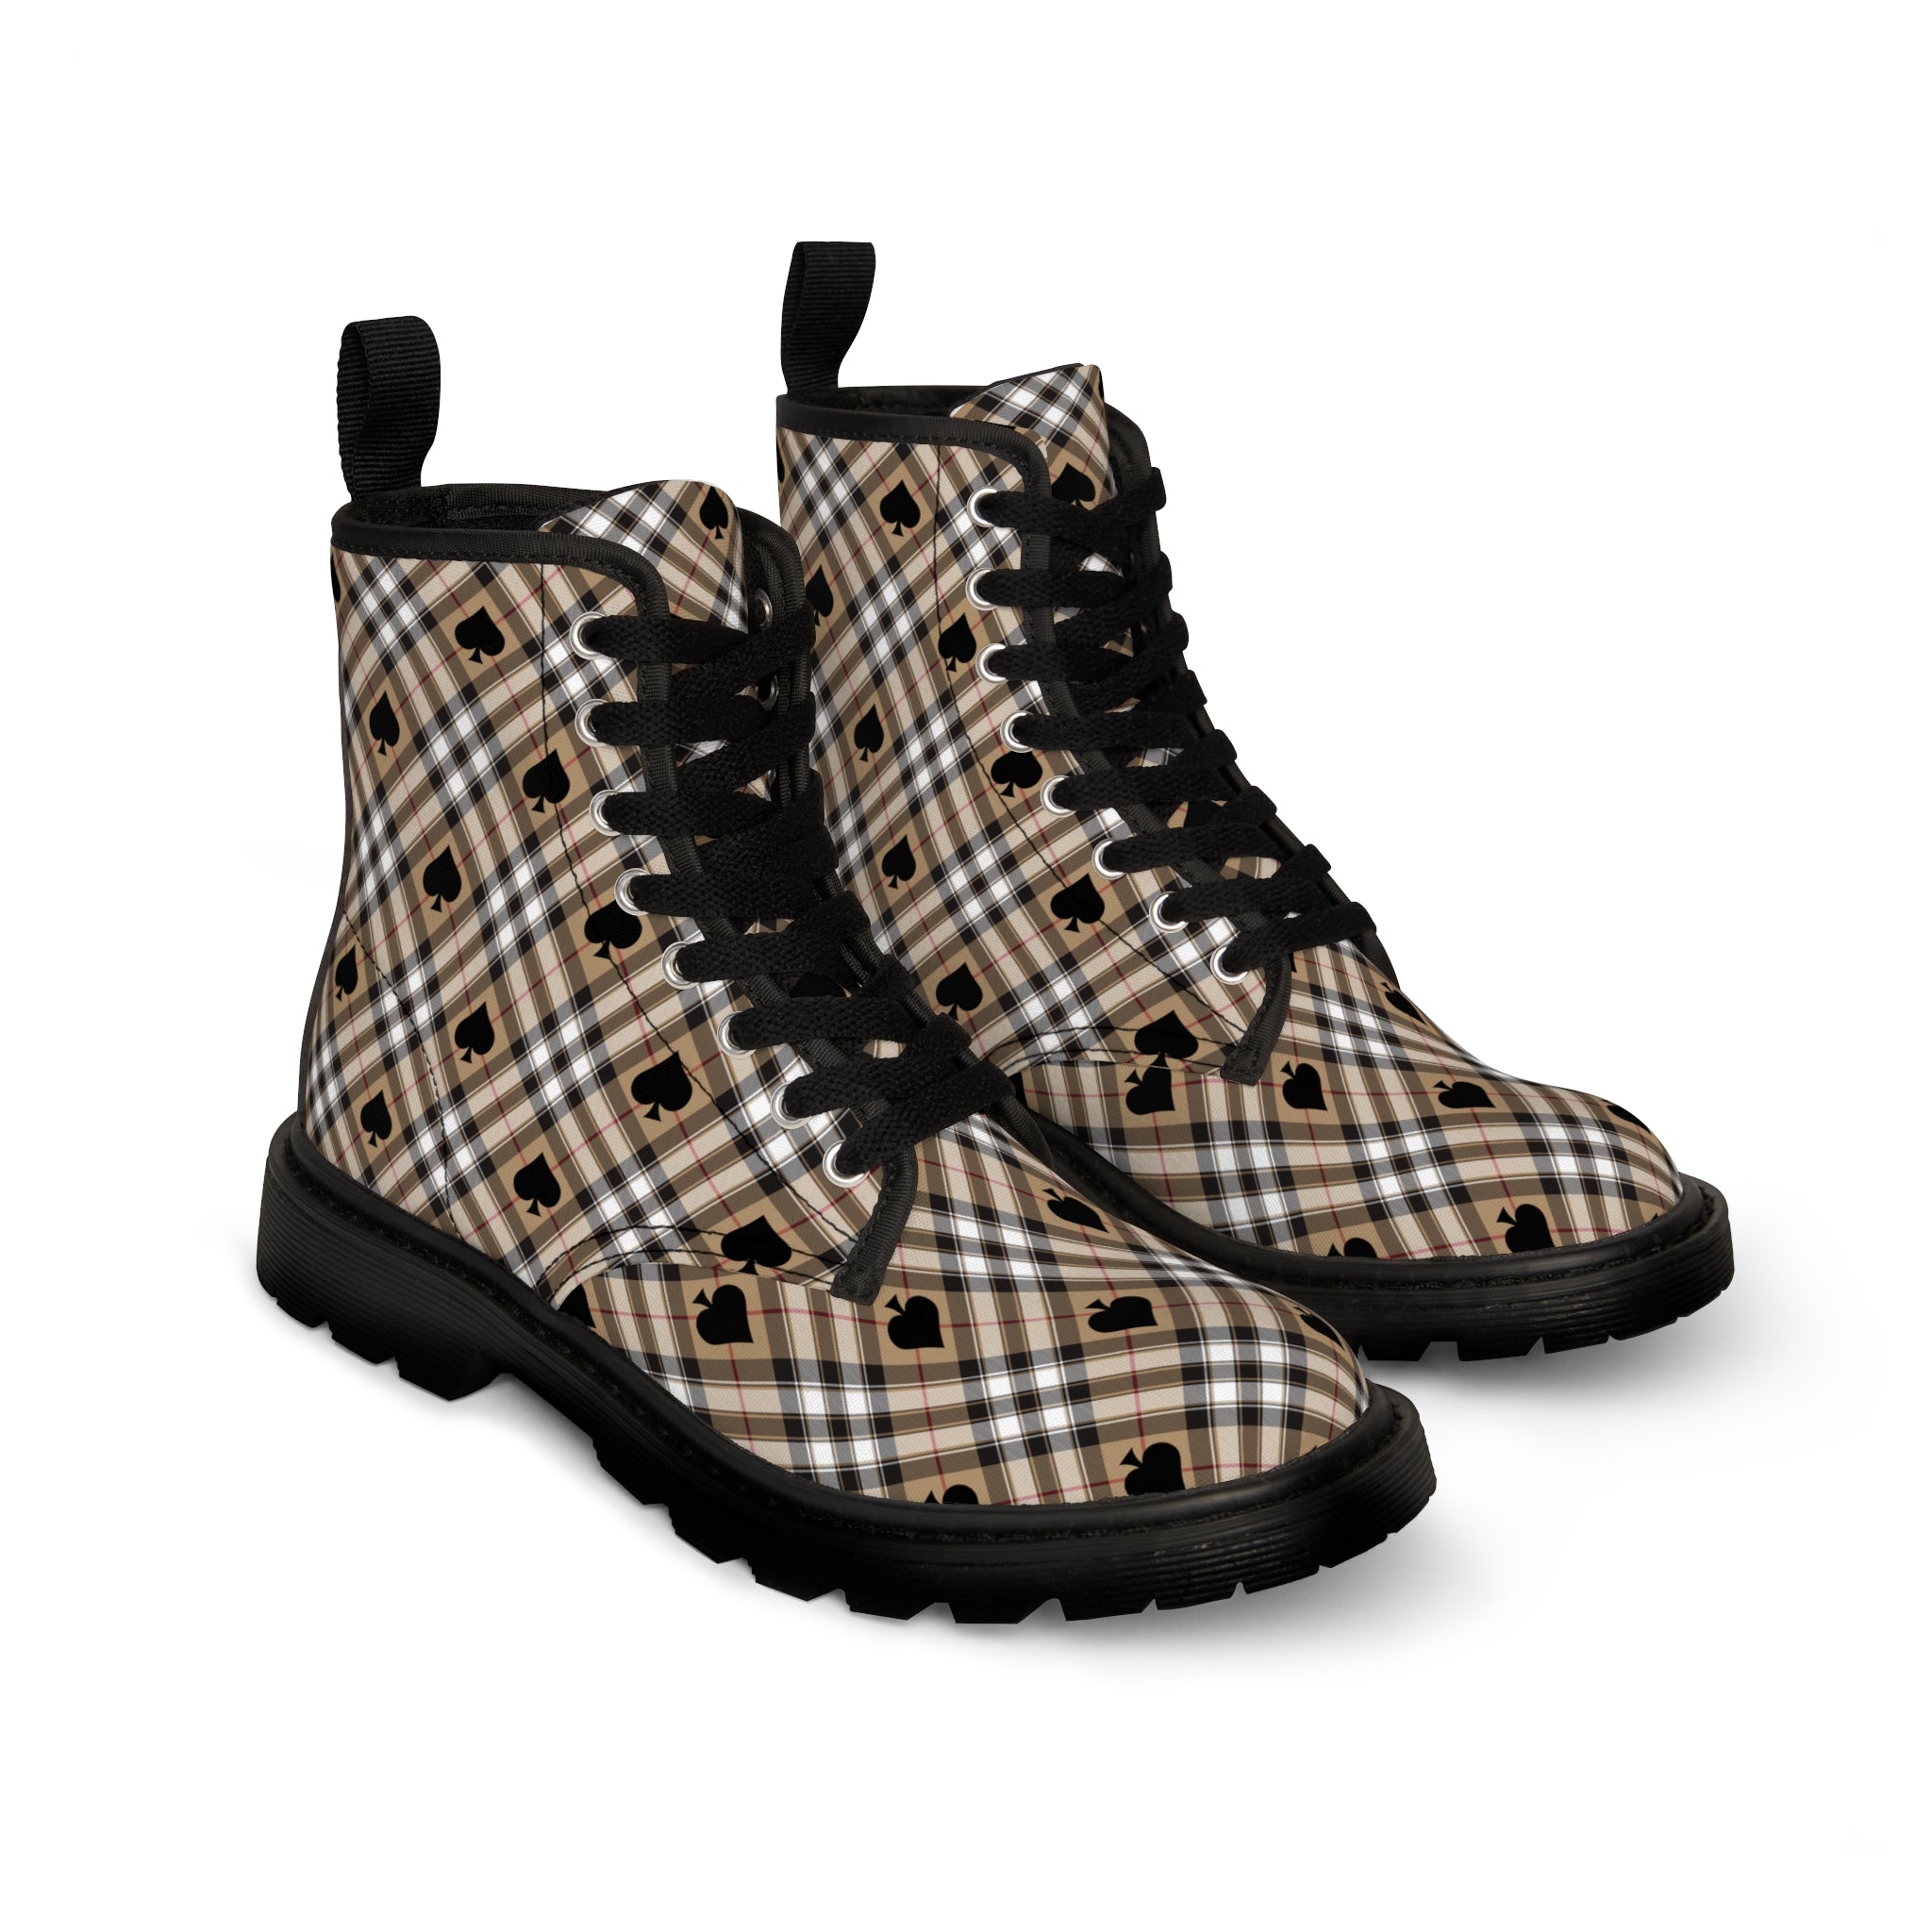  Ace of Spades in Beige Plaid Women's Canvas Boots, Military Style Lace Up Boots, Women's Canvas Boots Shoes